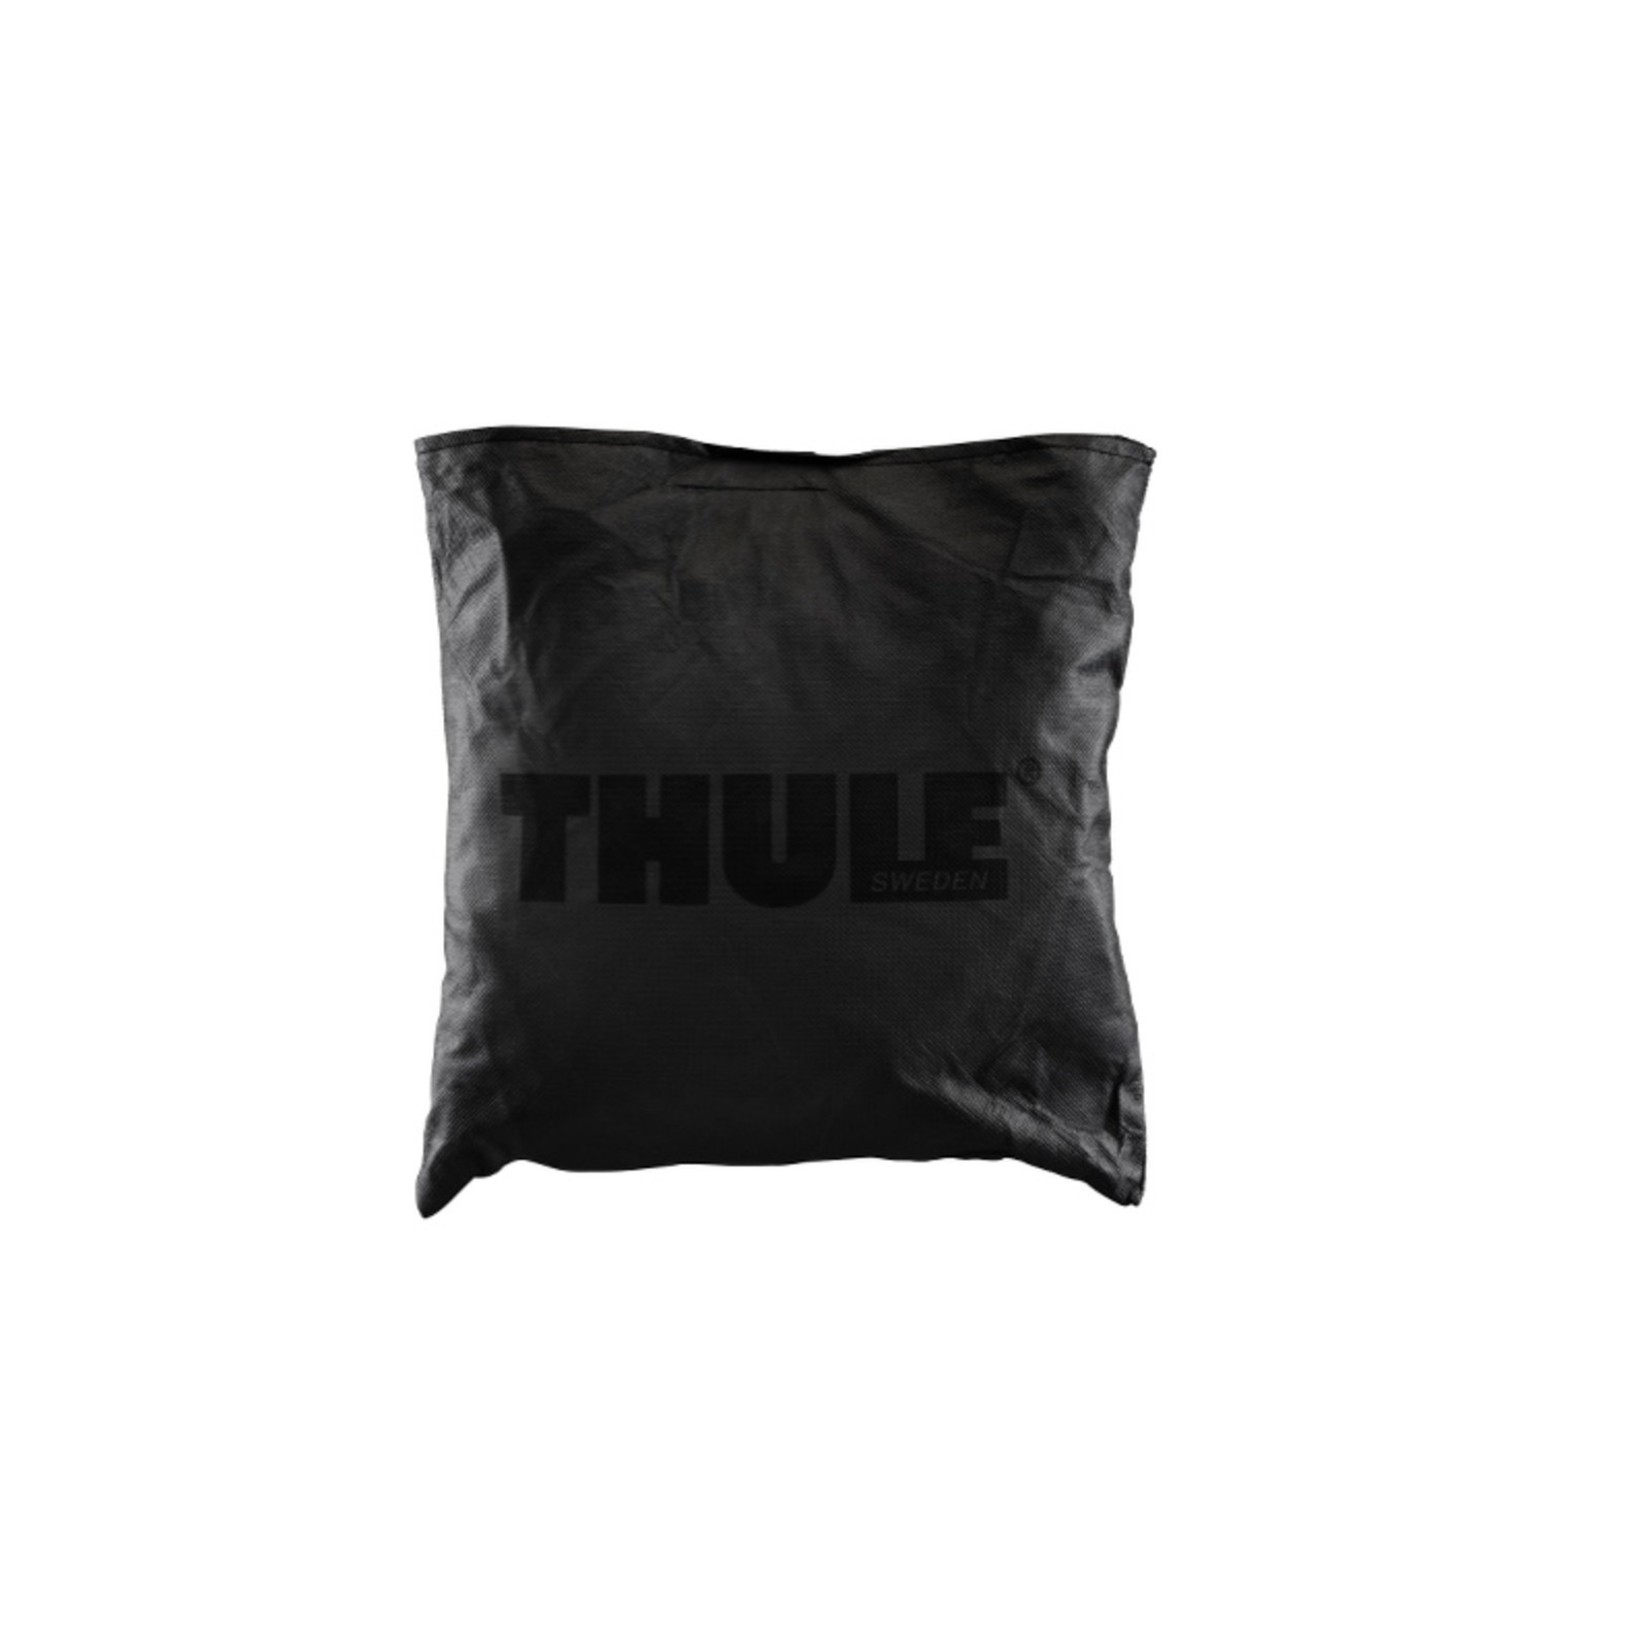 Thule Thule Roof Box Lid Cover XXL 698400 - Fits XXL Size Thule Roof Boxes